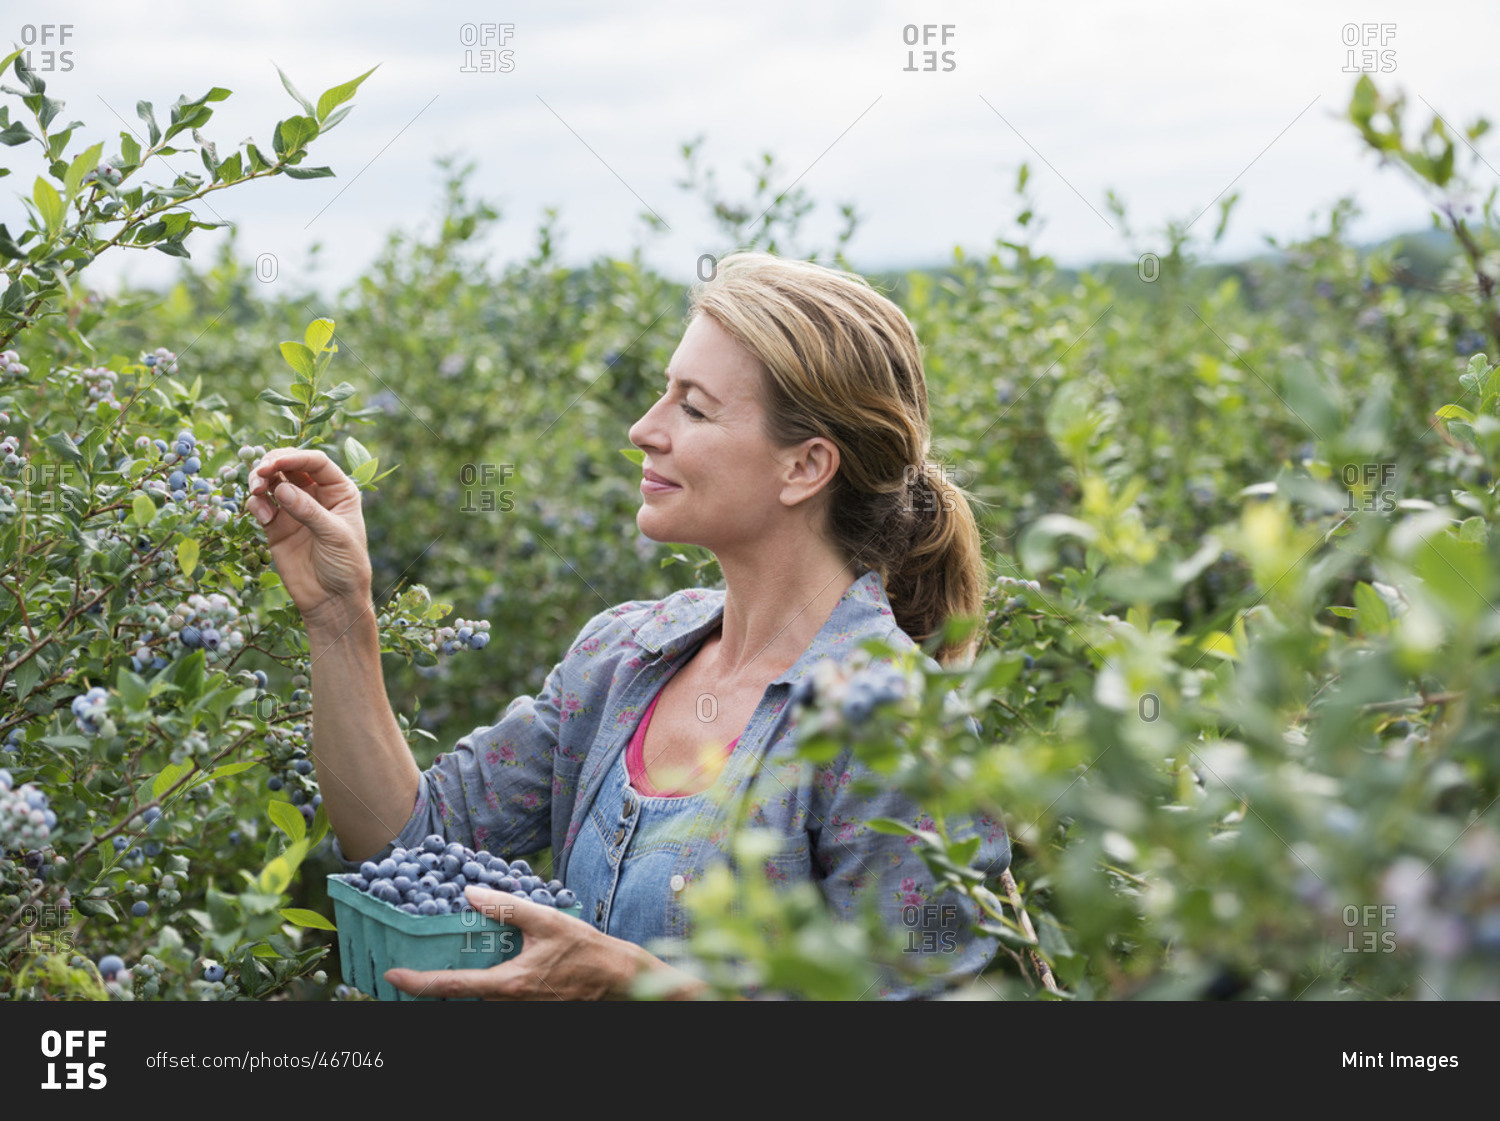 An organic fruit farm A woman picking the berry fruits from the bushes